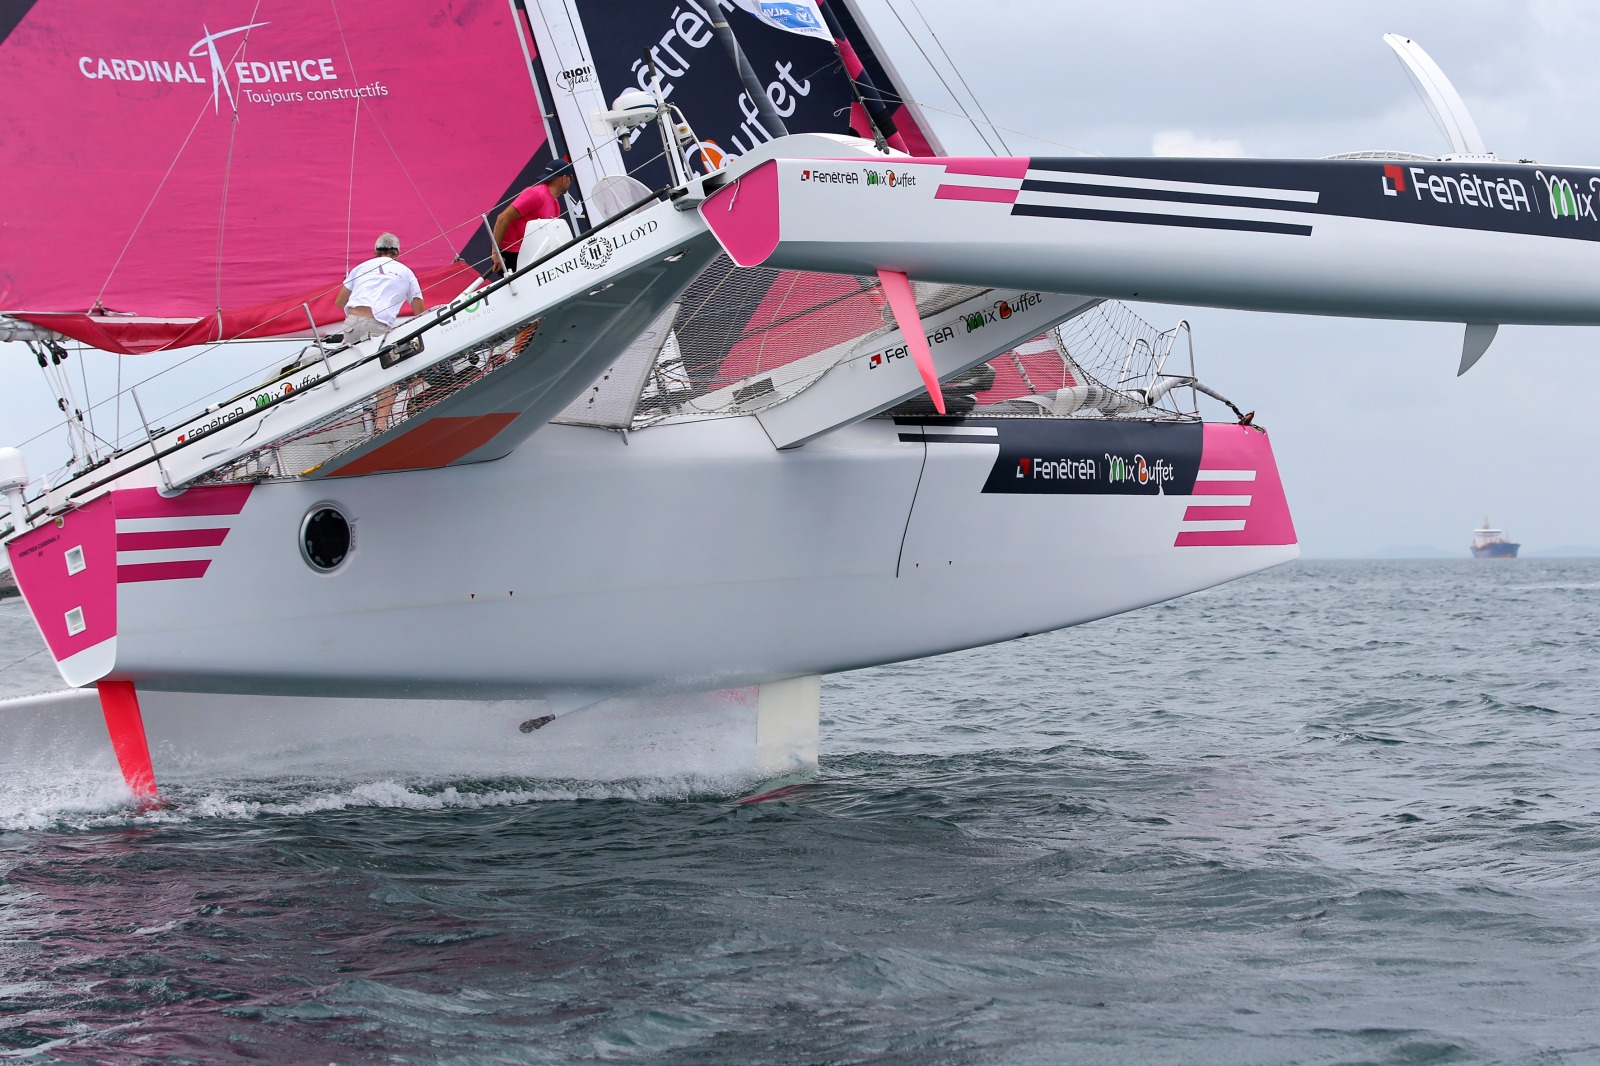  IMOCA Open 60, Class 40, Multi 50, Ultime  Transat Jacques Vabre  Le Havre FRA  Day 12